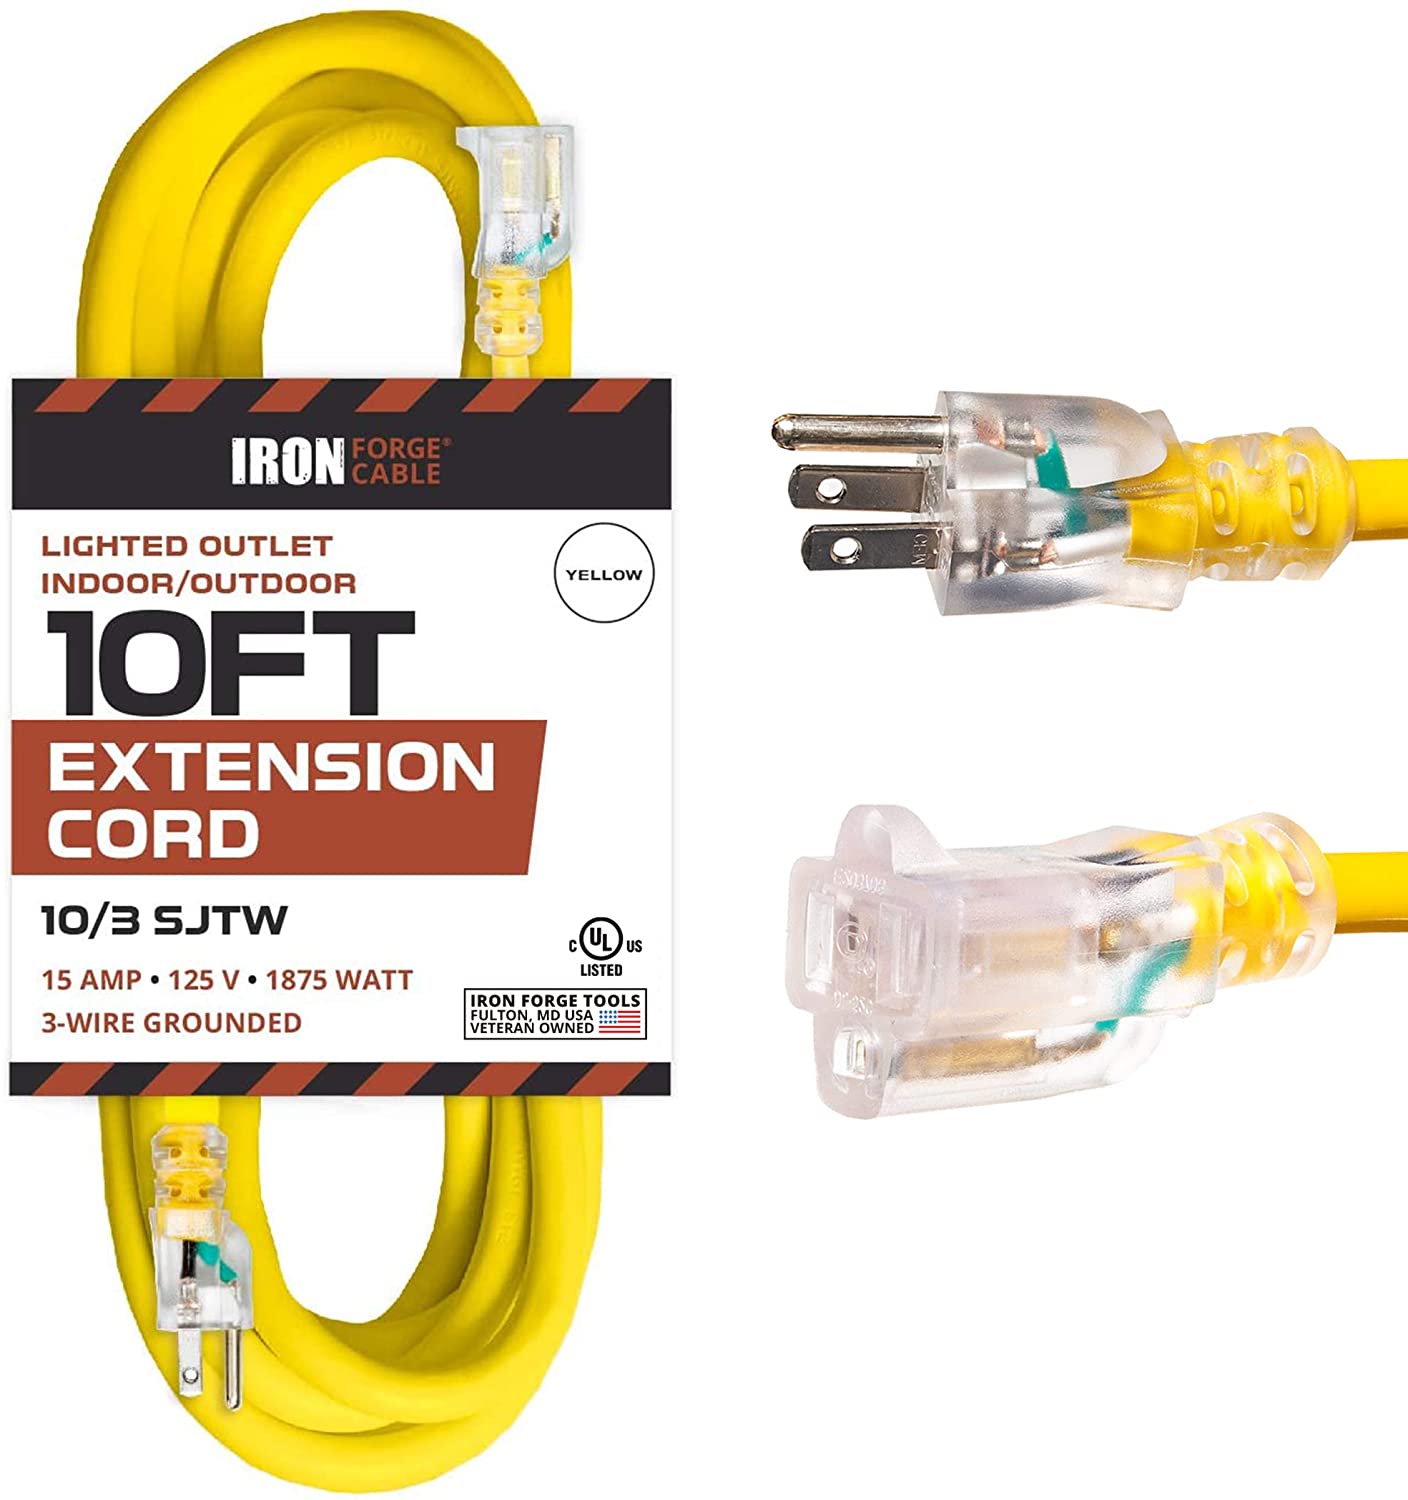 Iron Forge Cable 3 Prong Dryer Extension Cord 10 Ft, 220V Extension Cord  NEMA 10-30 Plug SRDT, 10/3 Dryer Cable 3 Prong Flat Hea